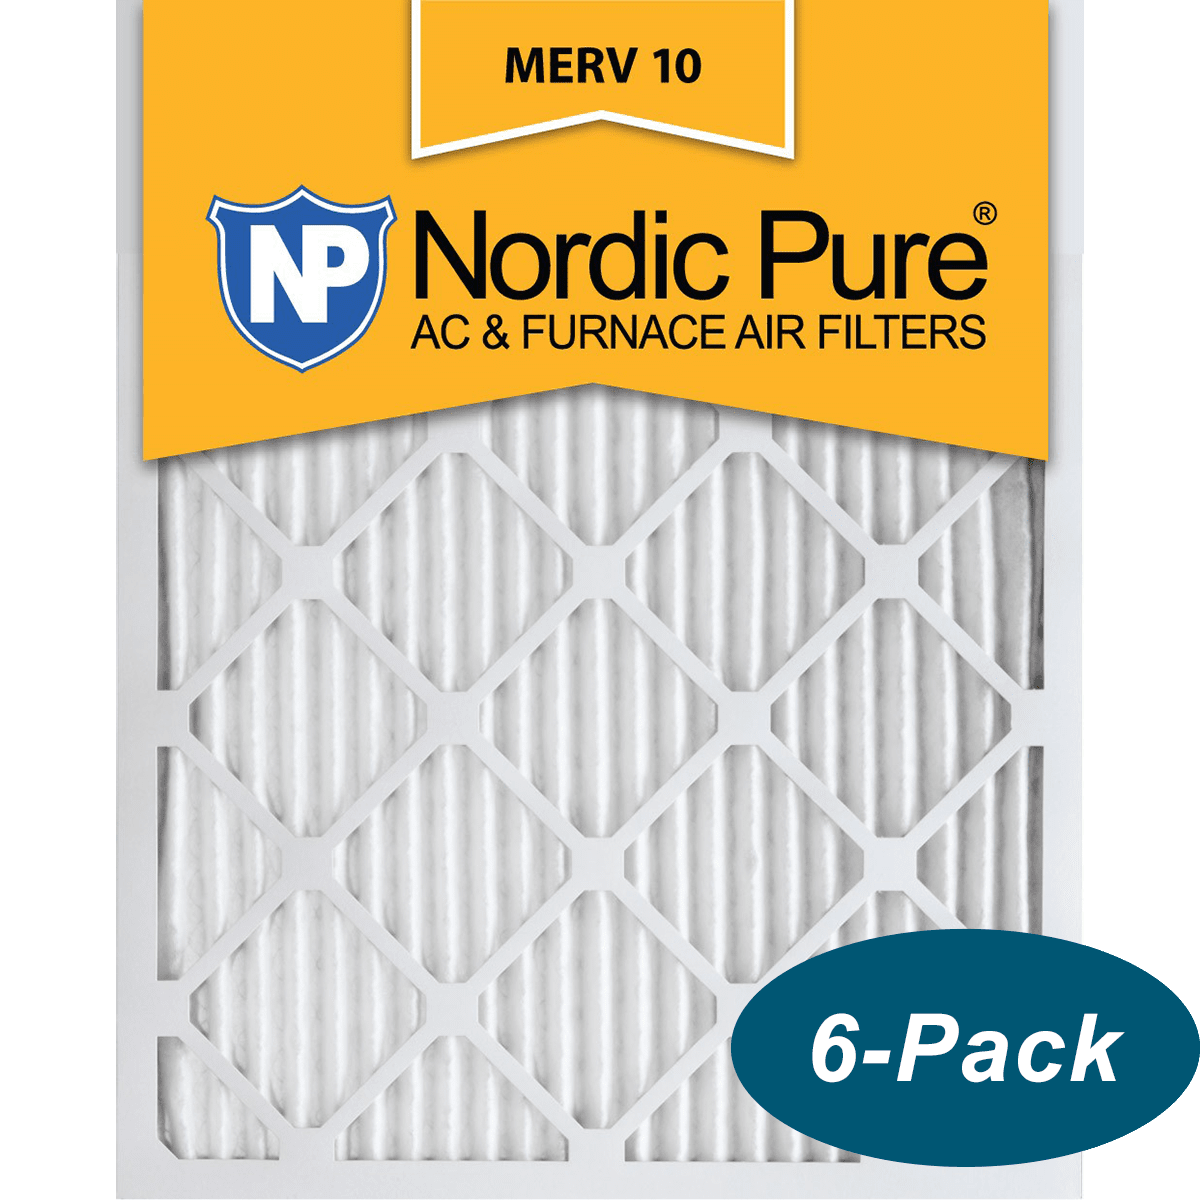 Nordic Pure 24x24x1 MPR 1000 Pleated Micro Allergen Replacement AC Furnace Air Filters 2 Pack 